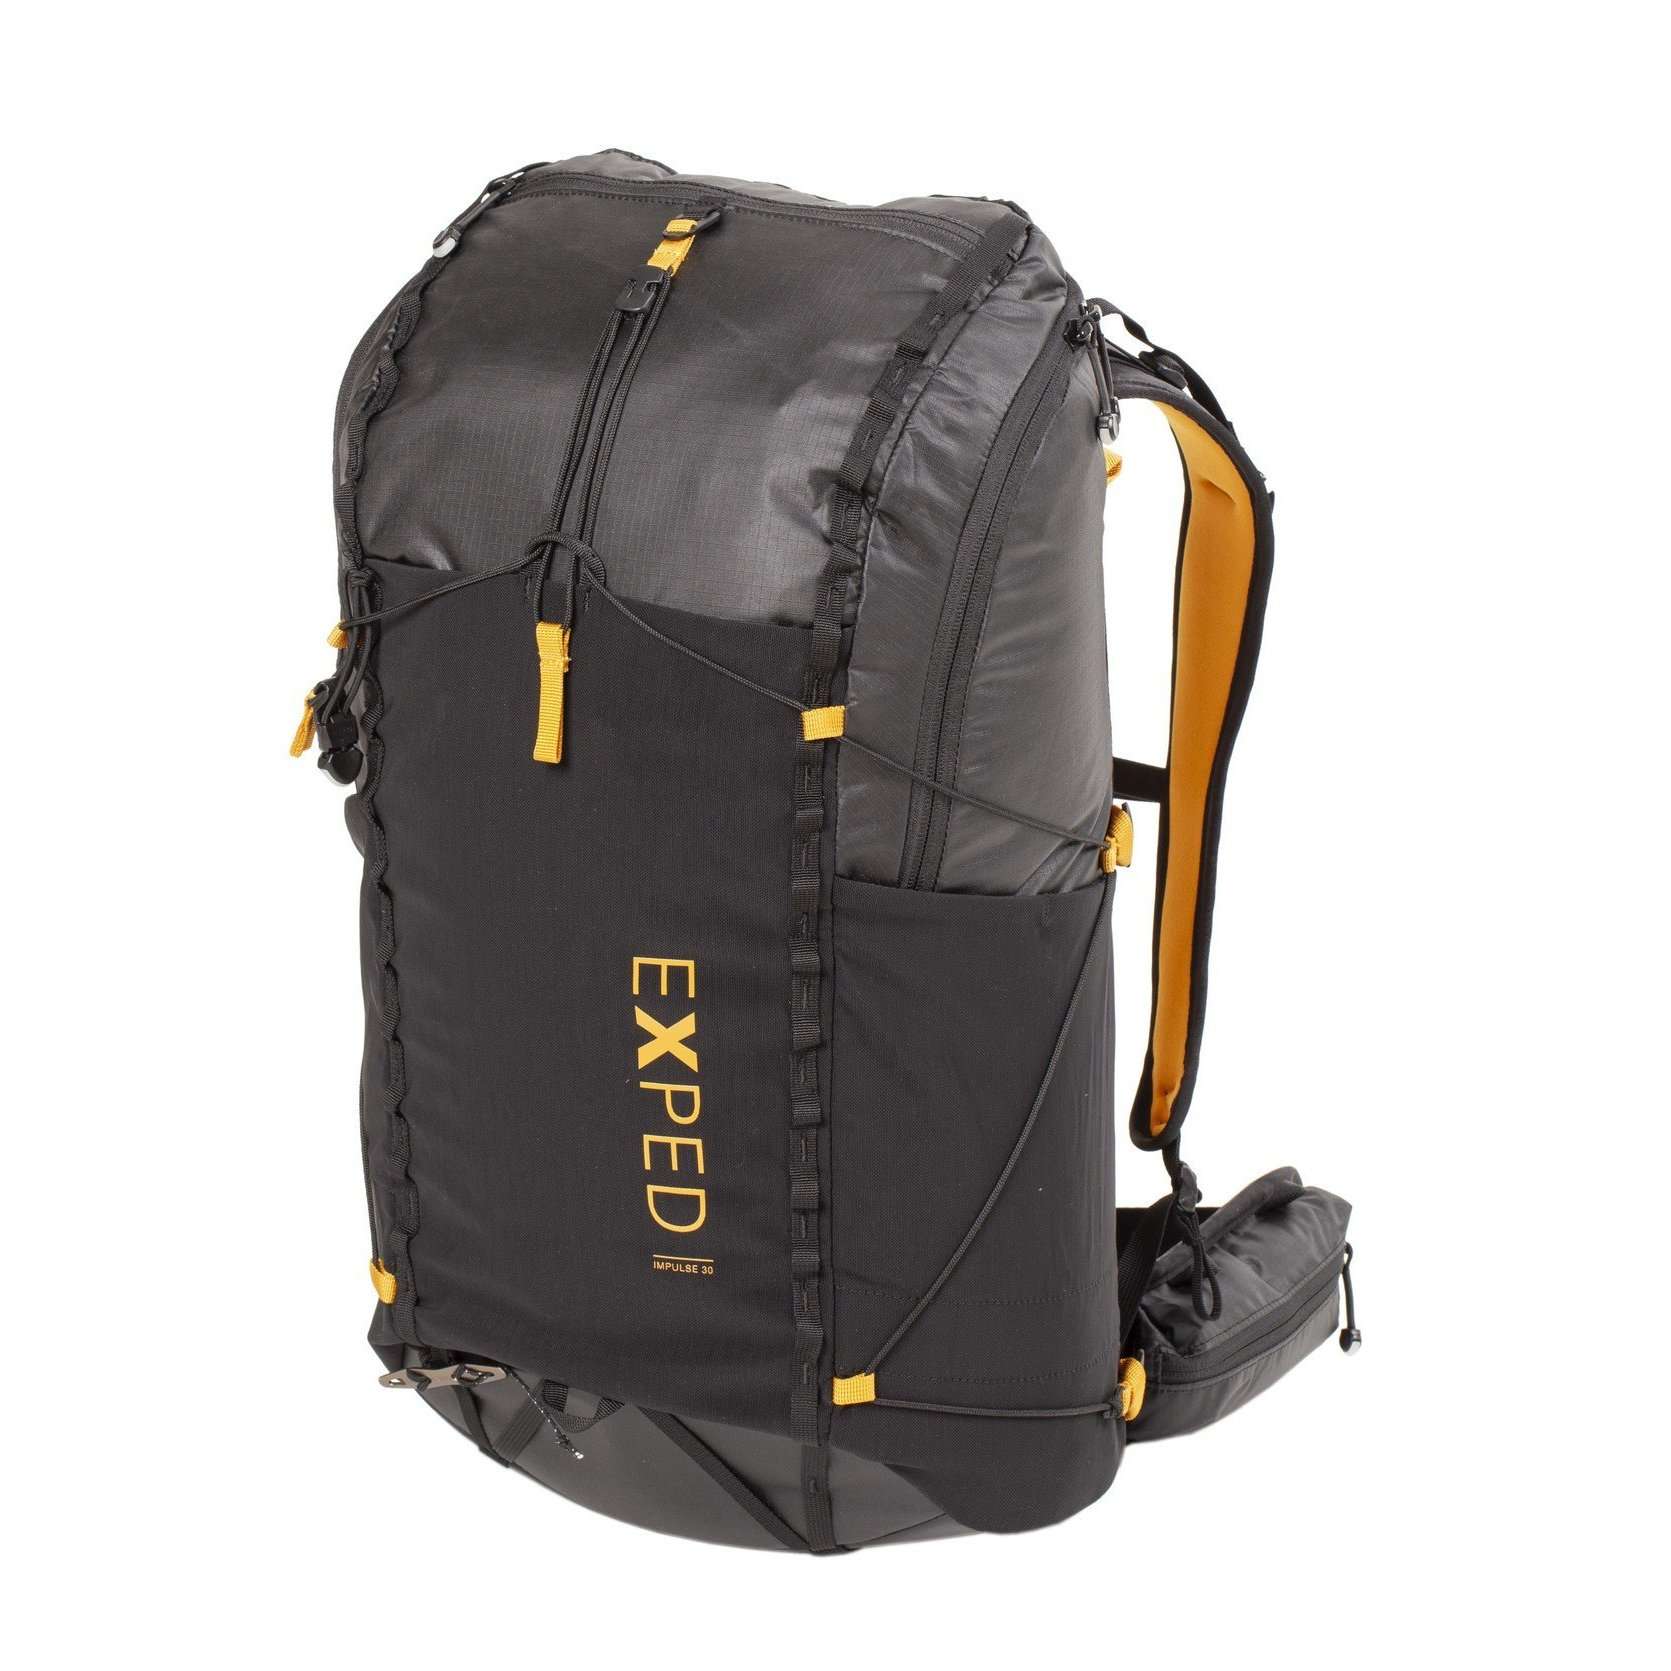 Exped, Exped Impulse 30 Litre, Rucksacks/Packs,Wylies Outdoor World,